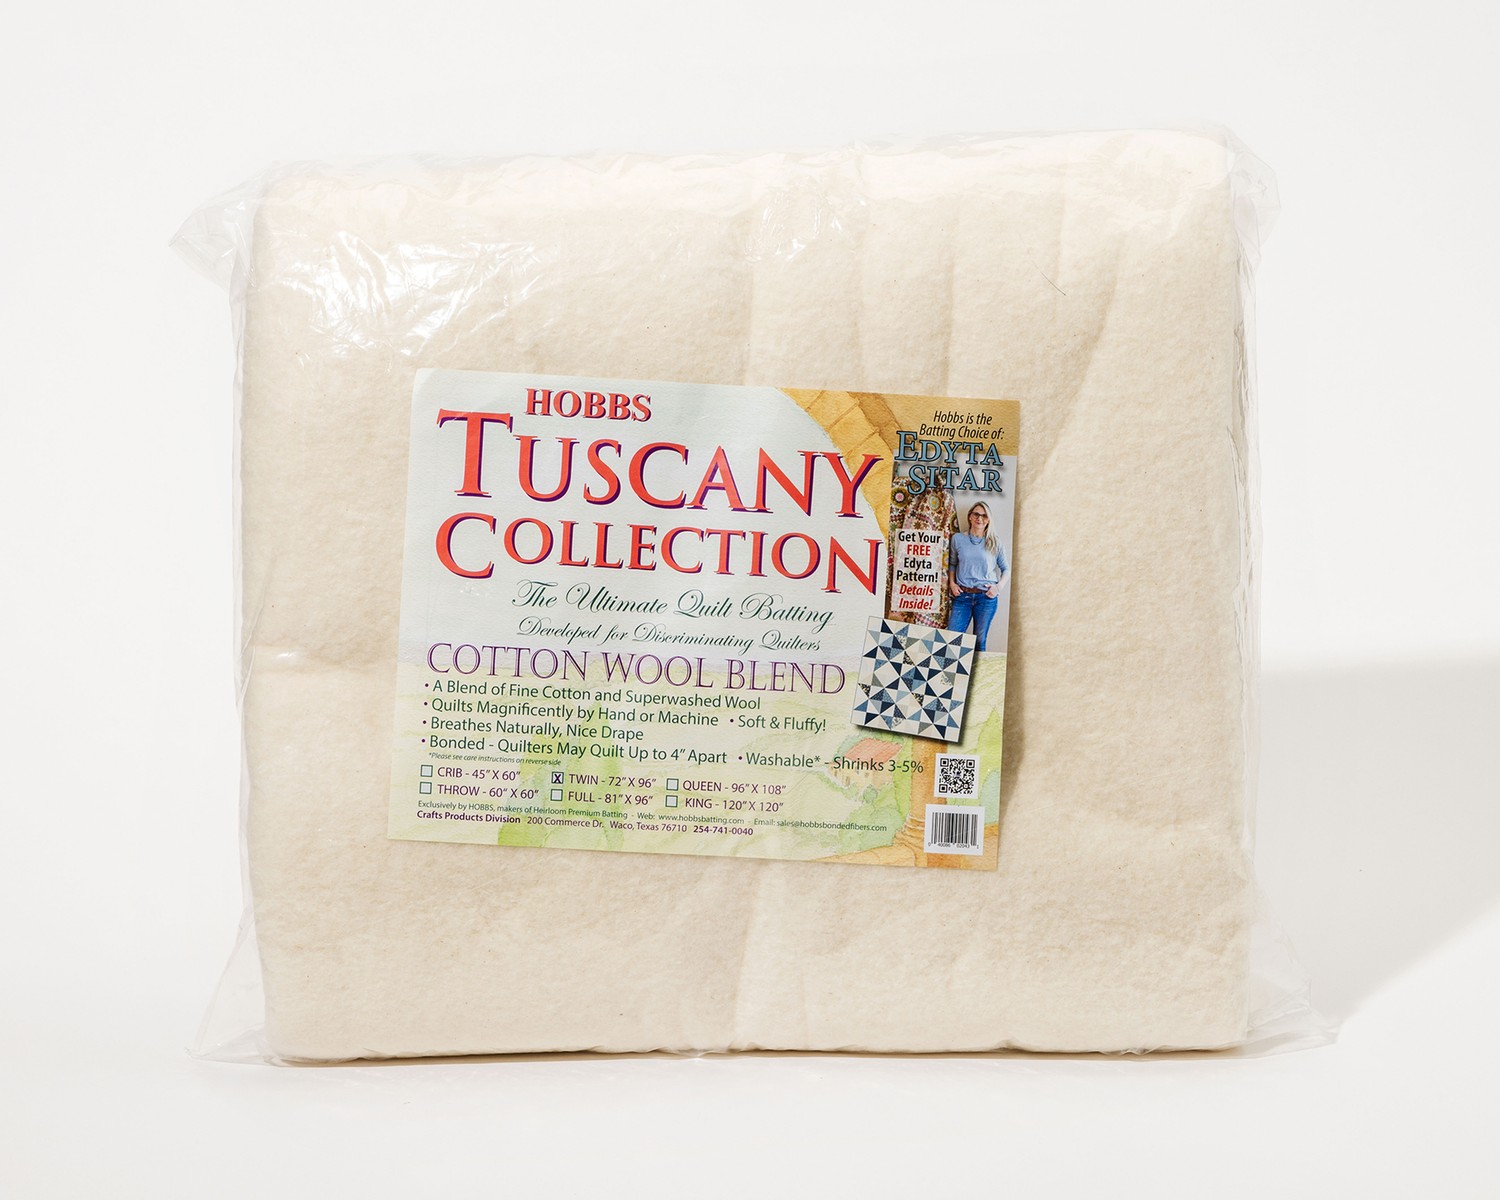 Hobbs Tuscany Supreme 100% Unbleached Natural Cotton Batting Twin 72in x 96in